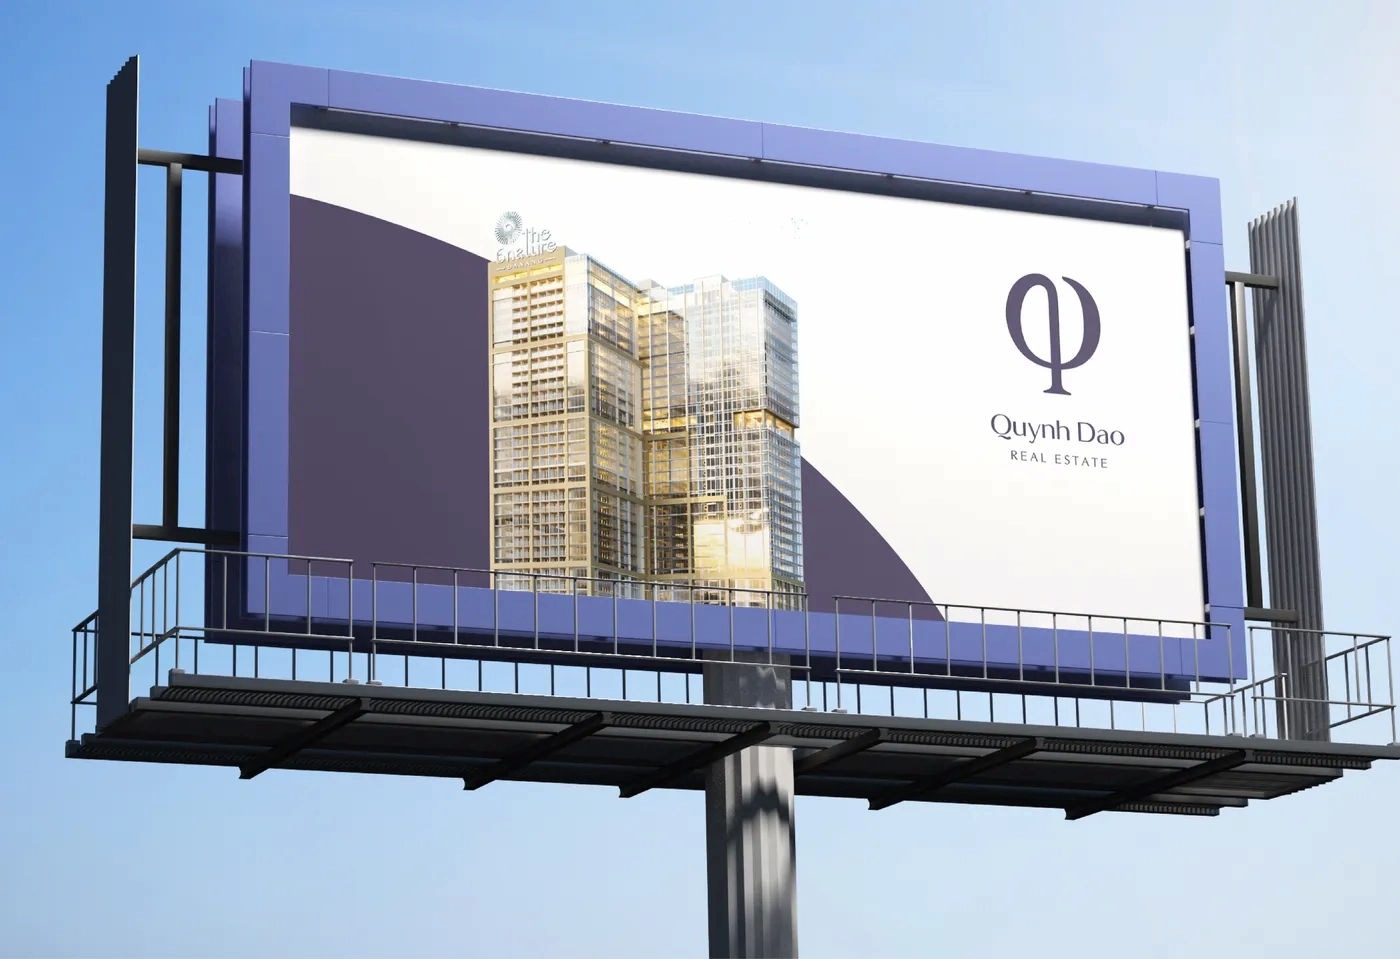 Quynh Dao Real Estate